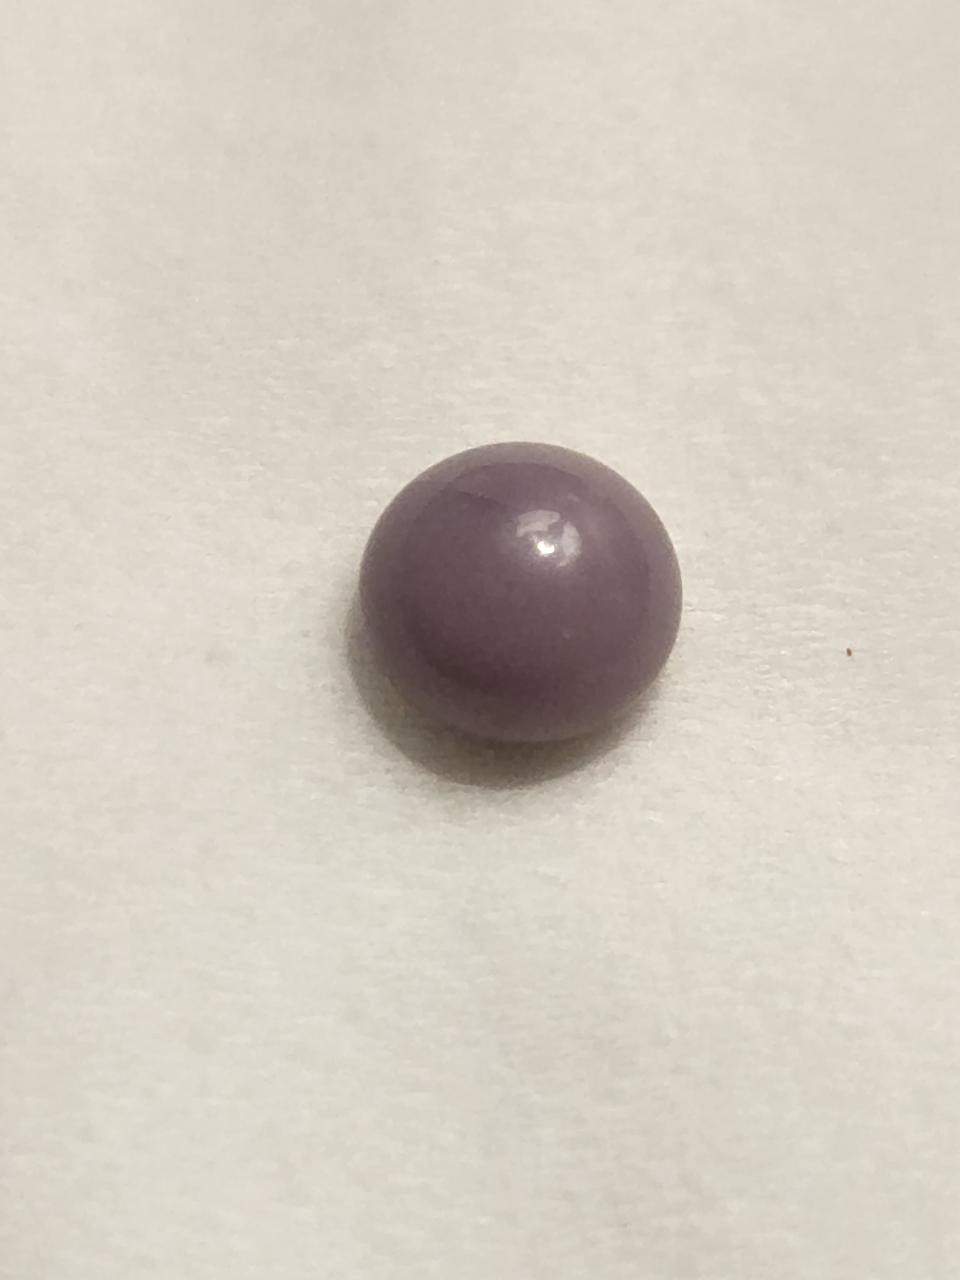 At first, Overland says his wife thought the pearl was a type of purple candy. (Photo: Scott Overland)